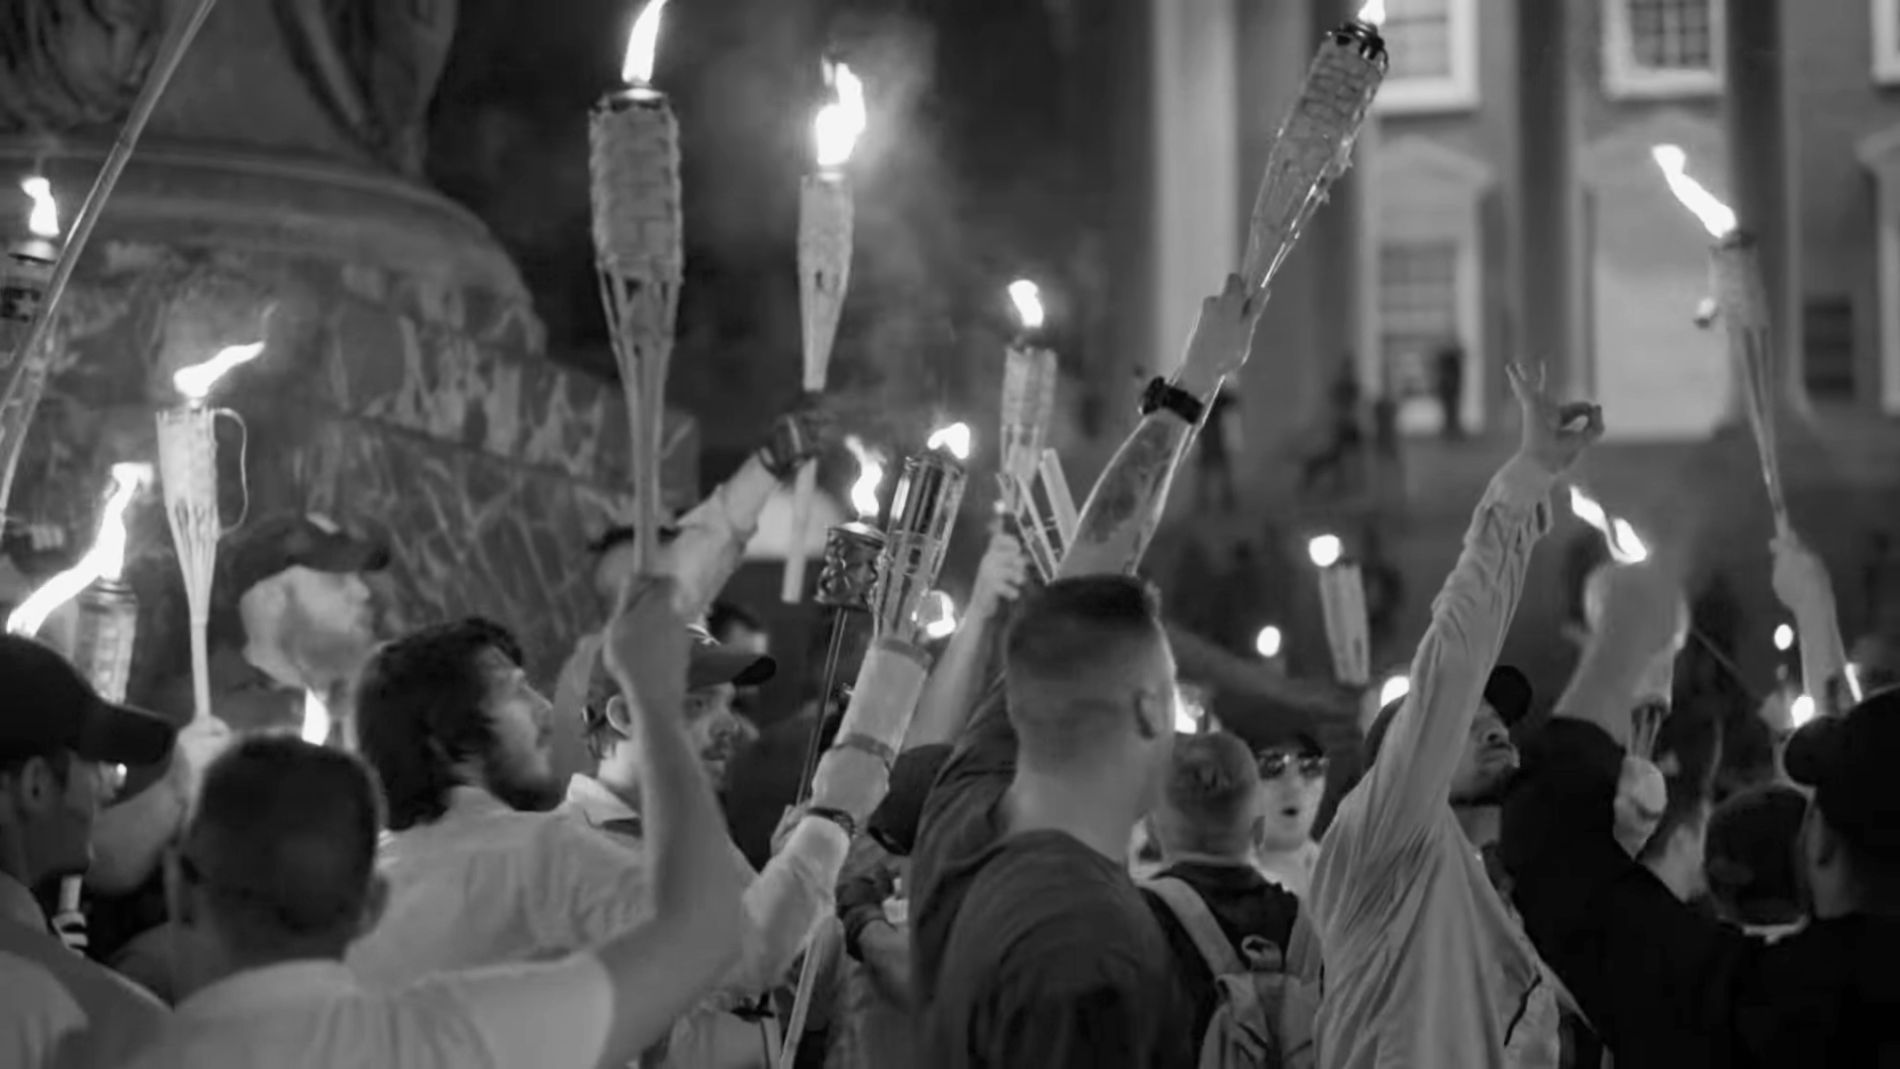 White Supremacists in Charlottesville via Vice News/YouTube